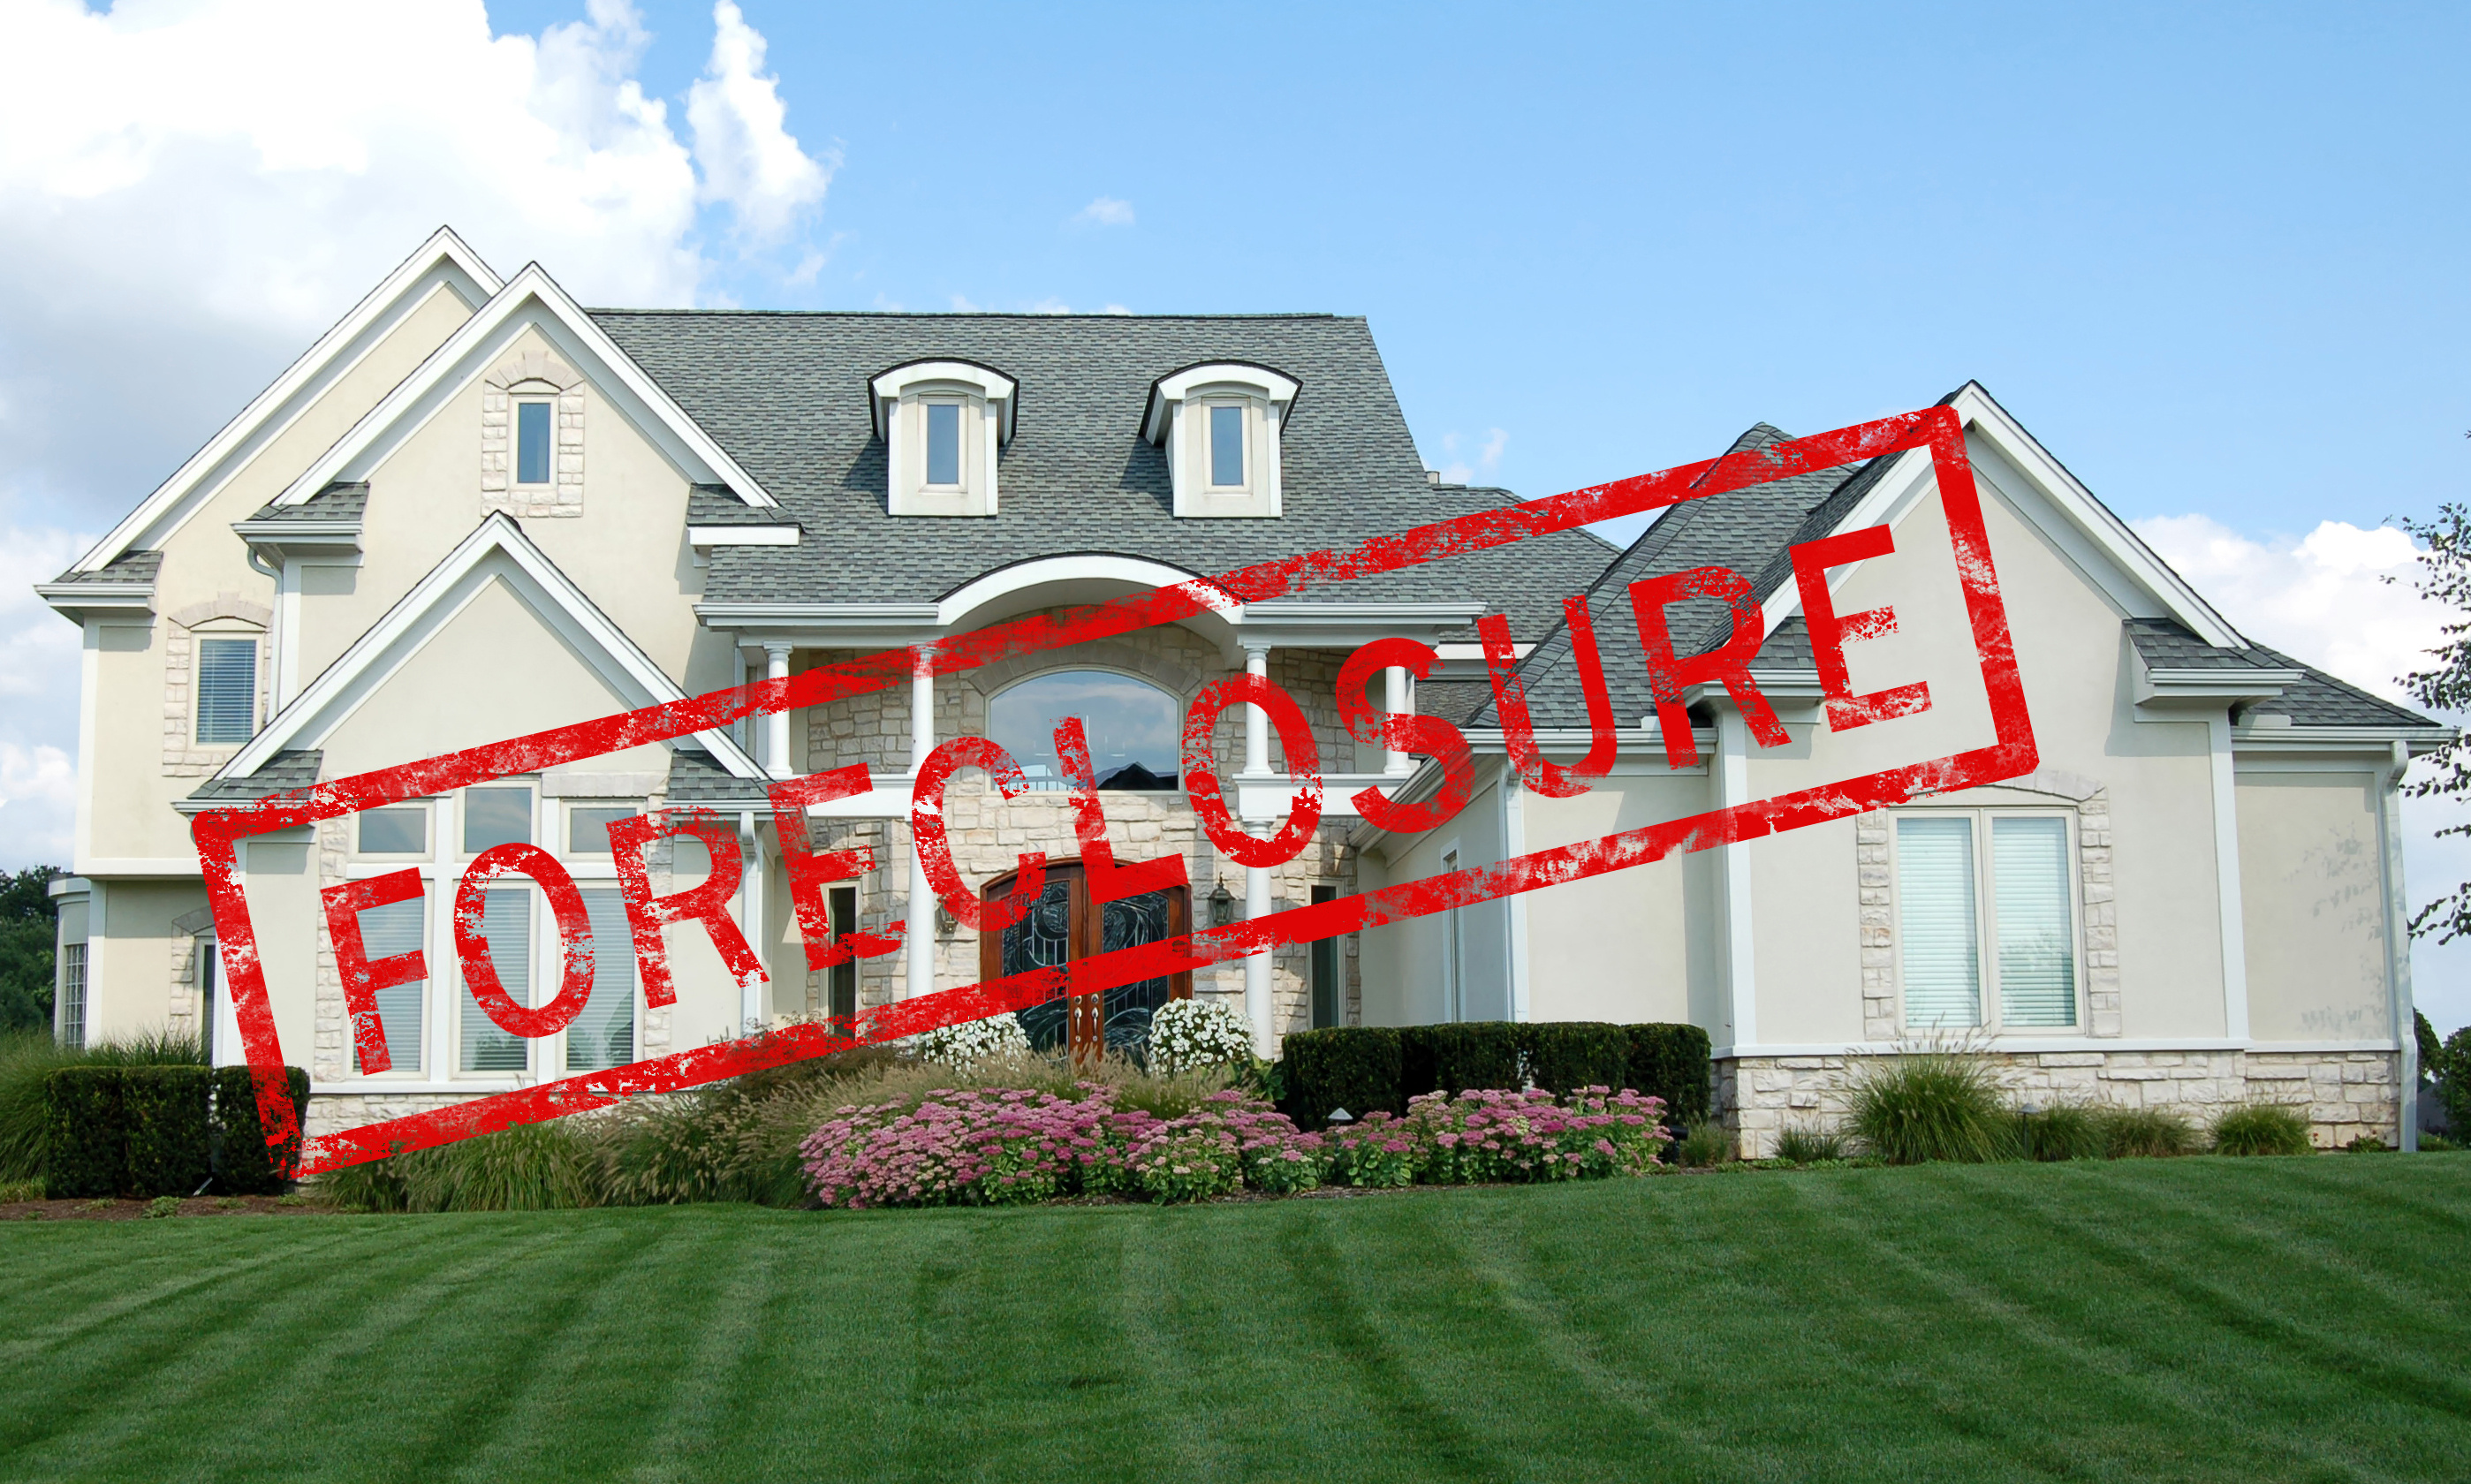 Call Phoenix Valuations, LLC when you need appraisals pertaining to Maricopa foreclosures